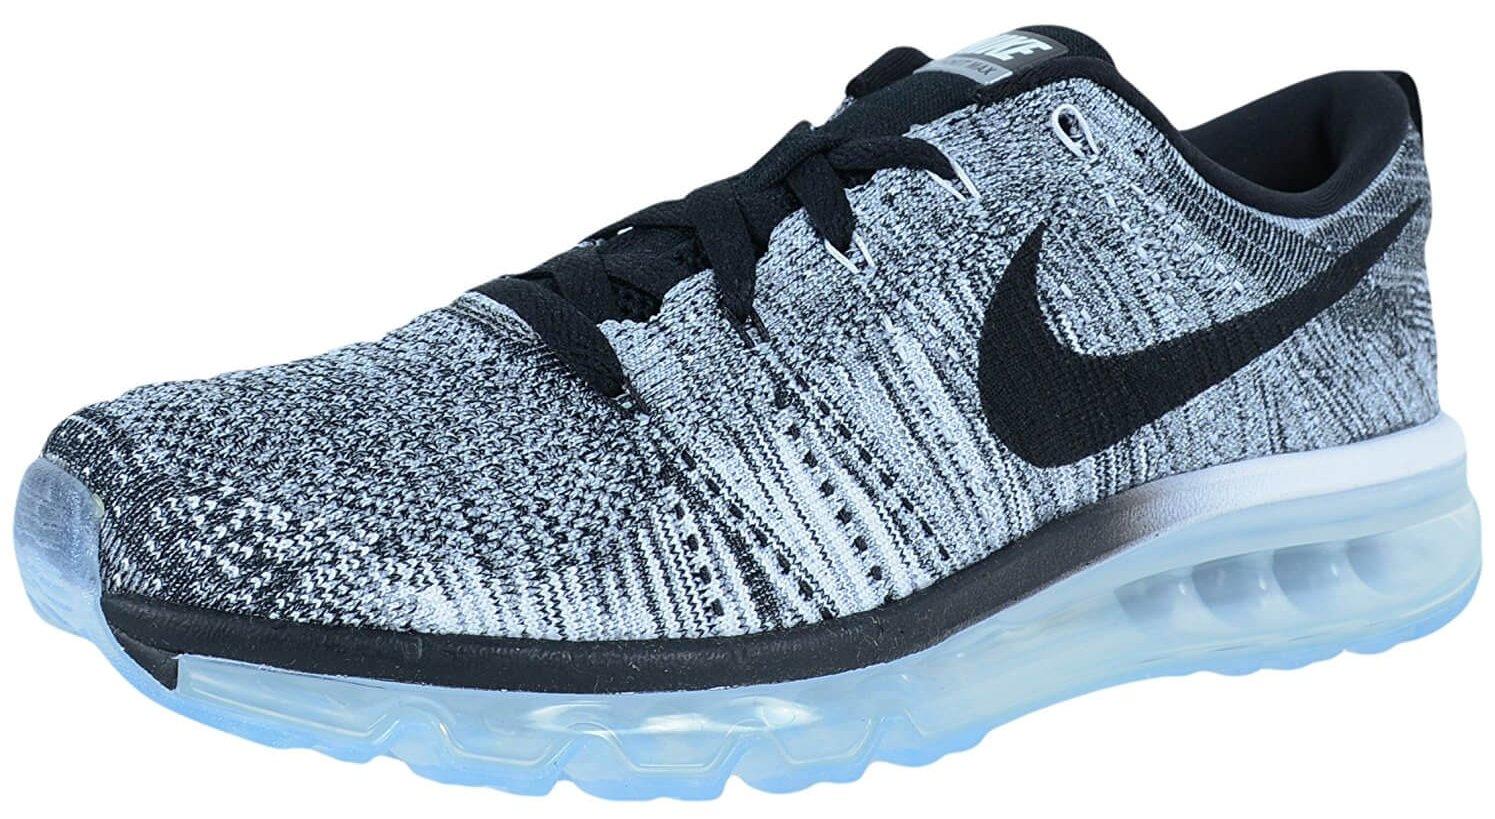 Discreto fácil de lastimarse Maryanne Jones Nike Flyknit Air Max Reviewed, Tested & Compared in 2022 | RunnerClick